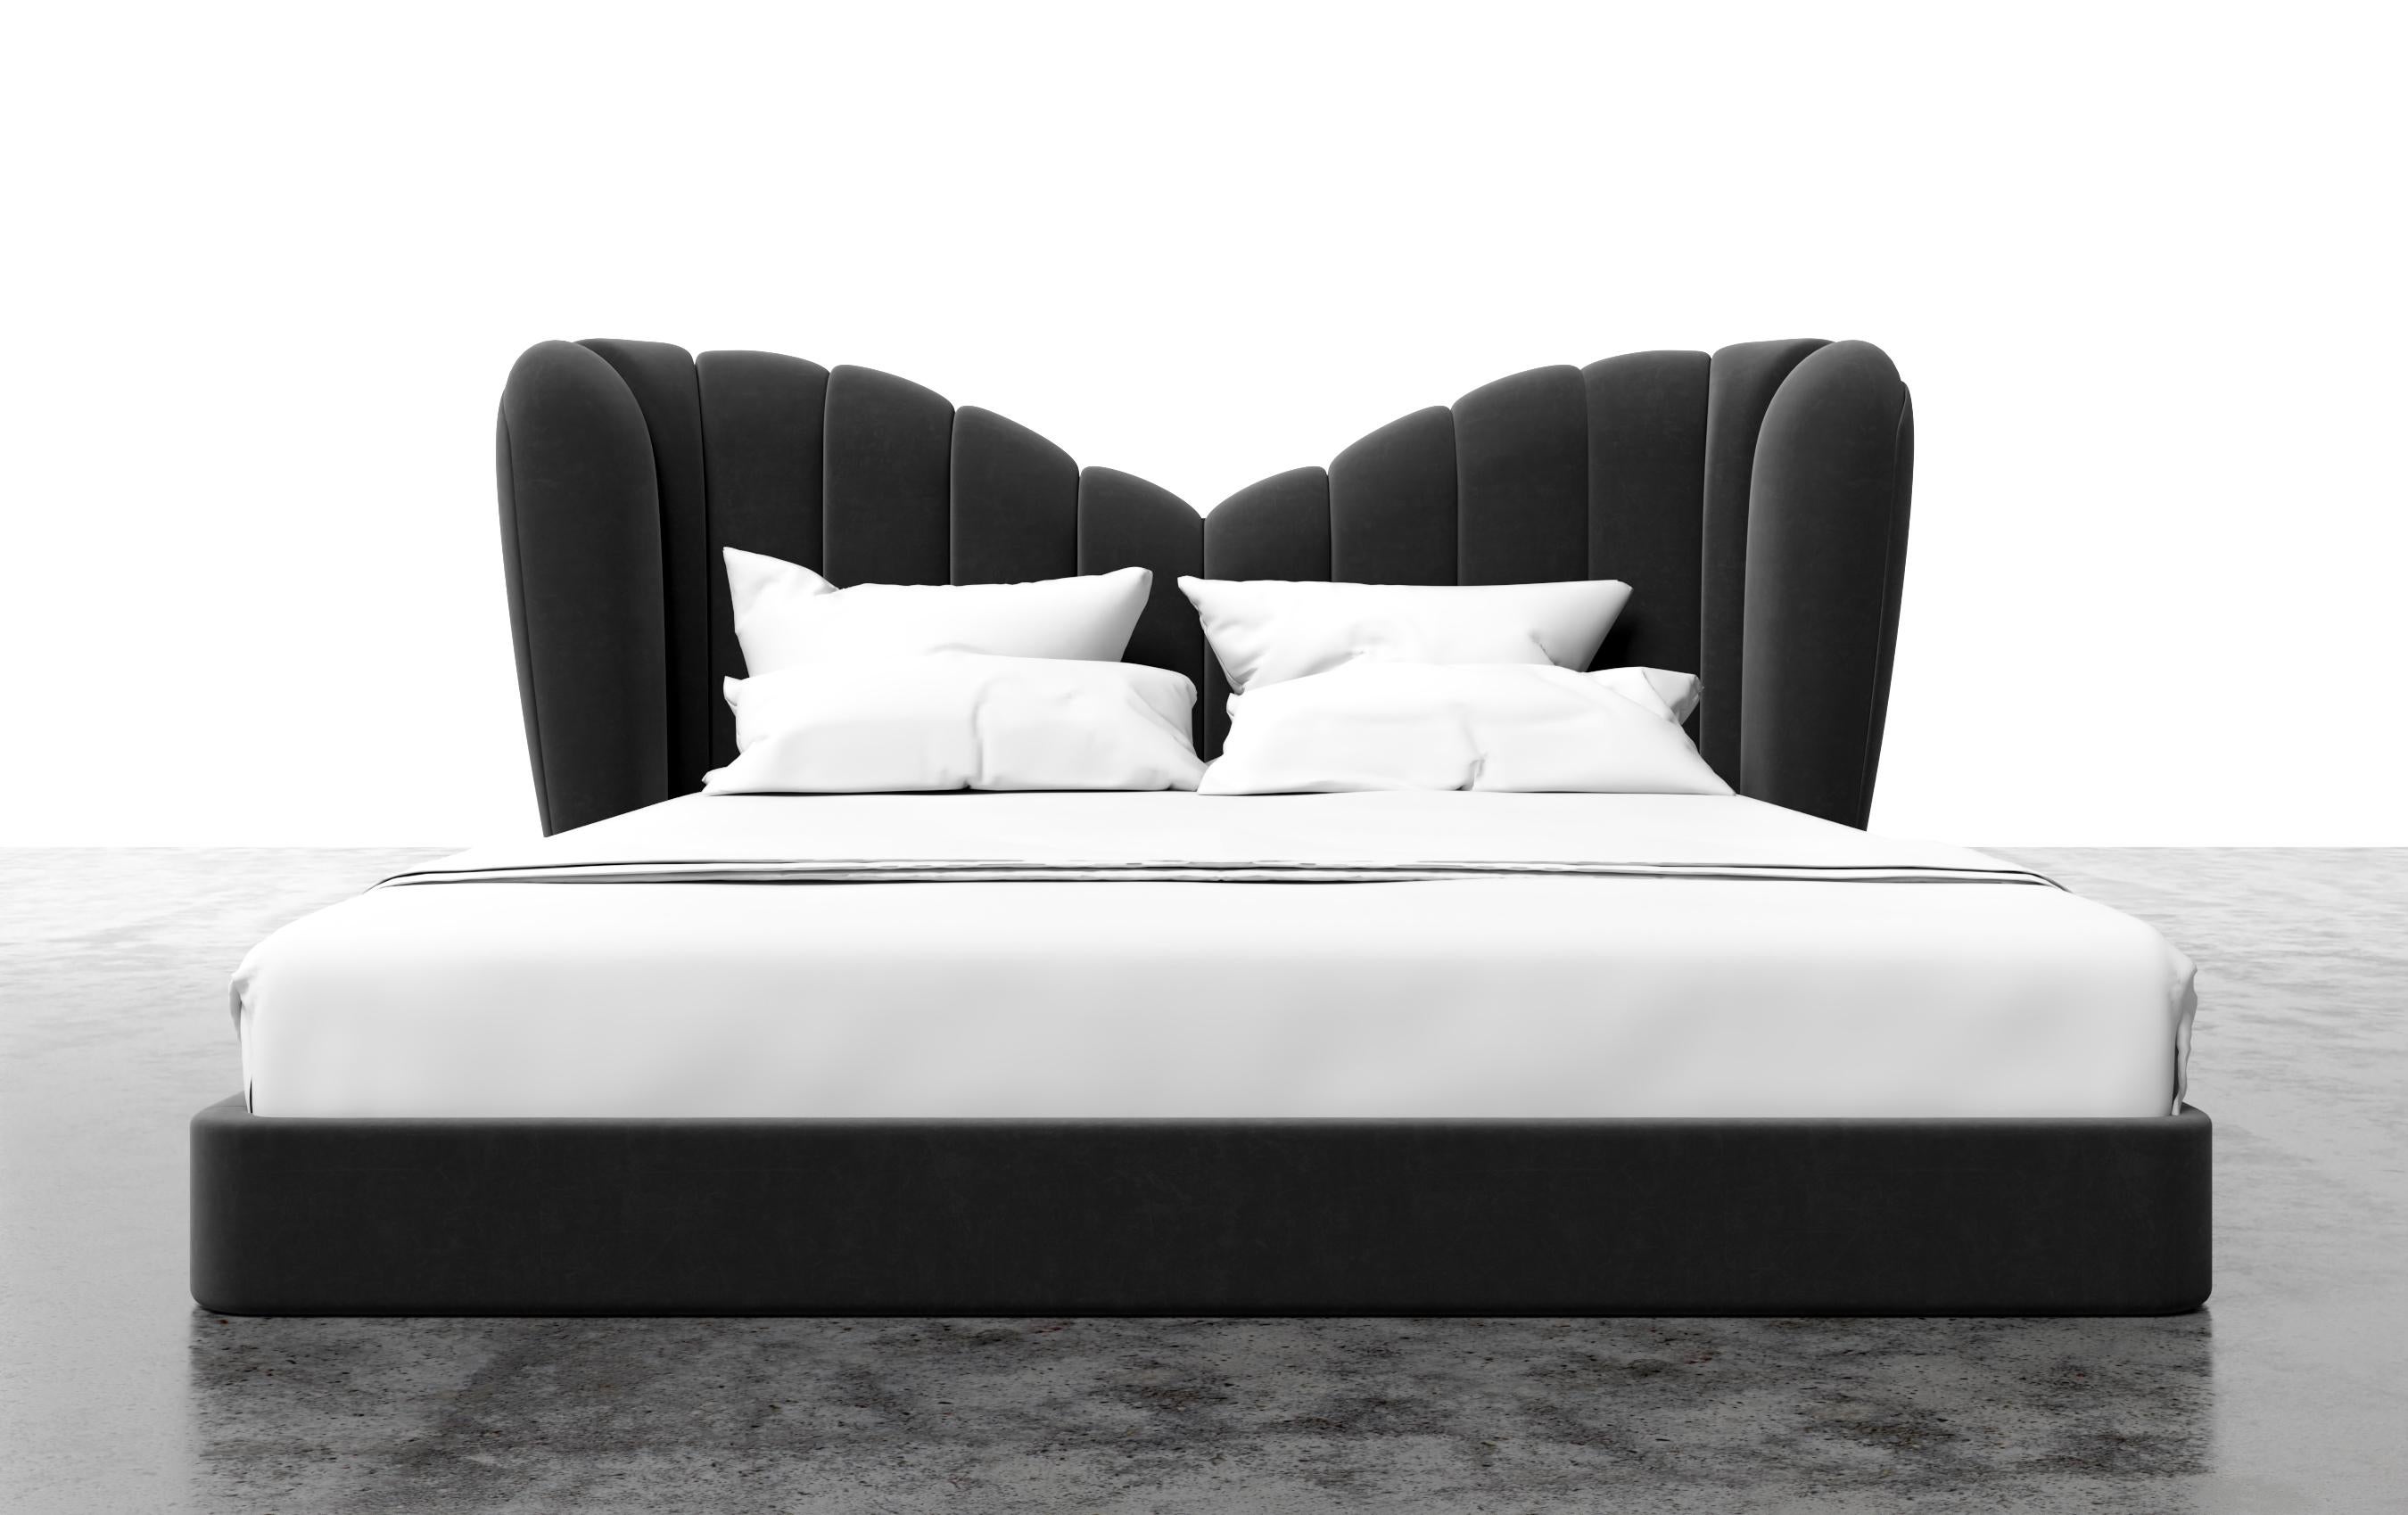 The Guinivere Bed is a luxurious and modern piece of furniture that offers a unique blend of style and comfort. Its standout feature is the curved and channeled upholstered headboard, which provides ample support for your back while also adding a